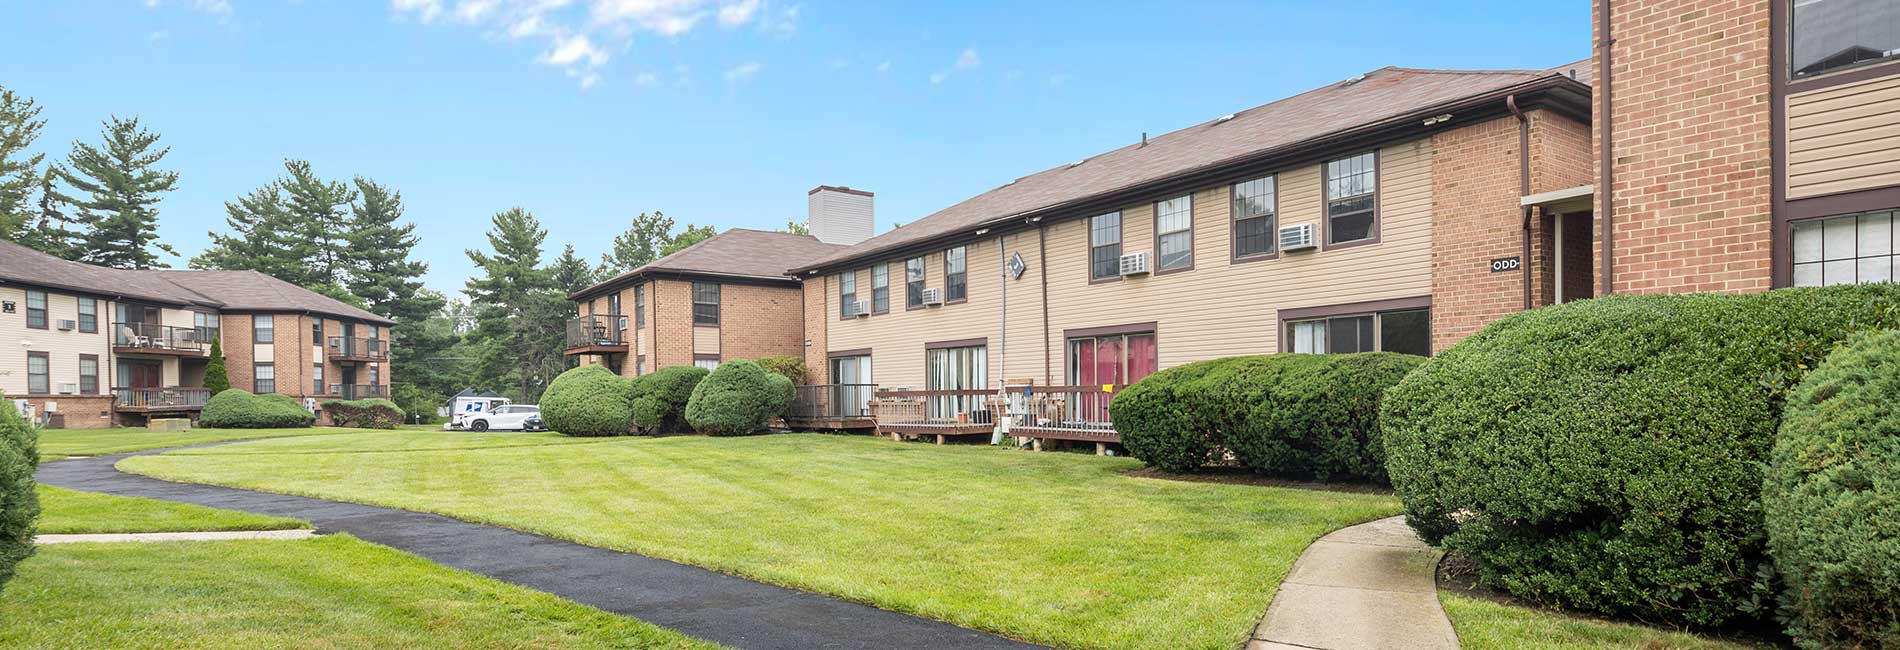 Princeton Gardens Apartments for Rent in Princeton, New Jersey